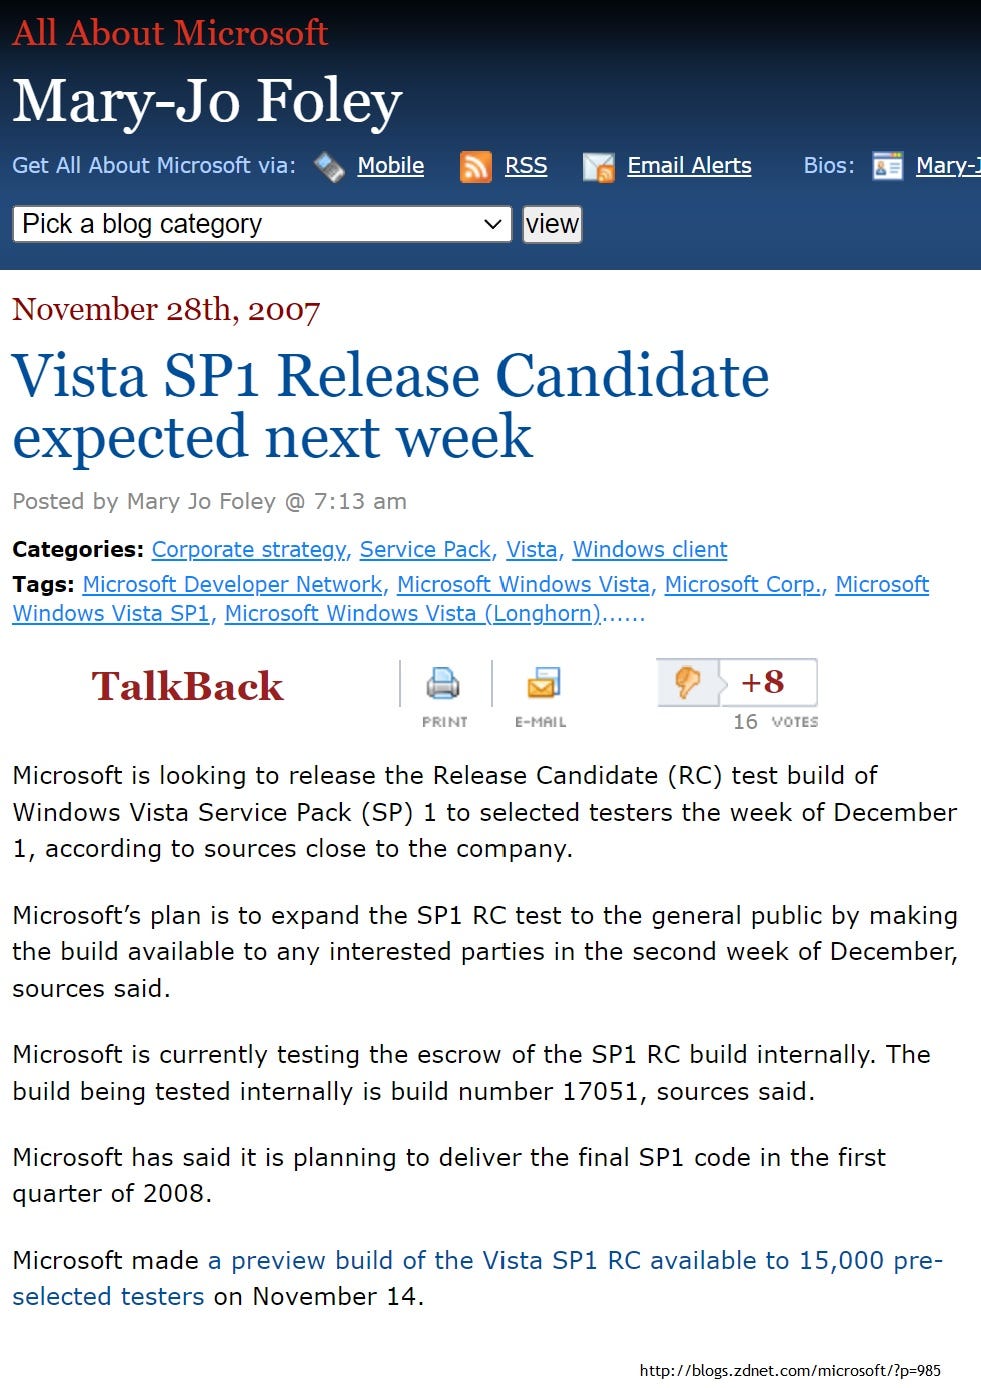 Vista SP1 Release Candidate expected next week Posted by Mary Jo Foley @ 7:13 am Categories: Corporate strategy, Service Pack, Vista, Windows client Tags: Microsoft Developer Network, Microsoft Windows Vista, Microsoft Corp., Microsoft Windows Vista SP1, Microsoft Windows Vista (Longhorn)...... TalkBack +8 PRINT E-MAIL 16 WOTES Microsoft is looking to release the Release Candidate (RC) test build of Windows Vista Service Pack (SP) 1 to selected testers the week of December 1, according to sources close to the company. Microsoft's plan is to expand the SP1 RC test to the general public by making the build available to any interested parties in the second week of December, sources said. Microsoft is currently testing the escrow of the SP1 RC build internally. The build being tested internally is build number 17051, sources said. Microsoft has said it is planning to deliver the final SP1 code in the first quarter of 2008. Microsoft made a preview build of the Vista SP1 RC available to 15,000 preselected testers on November 14.